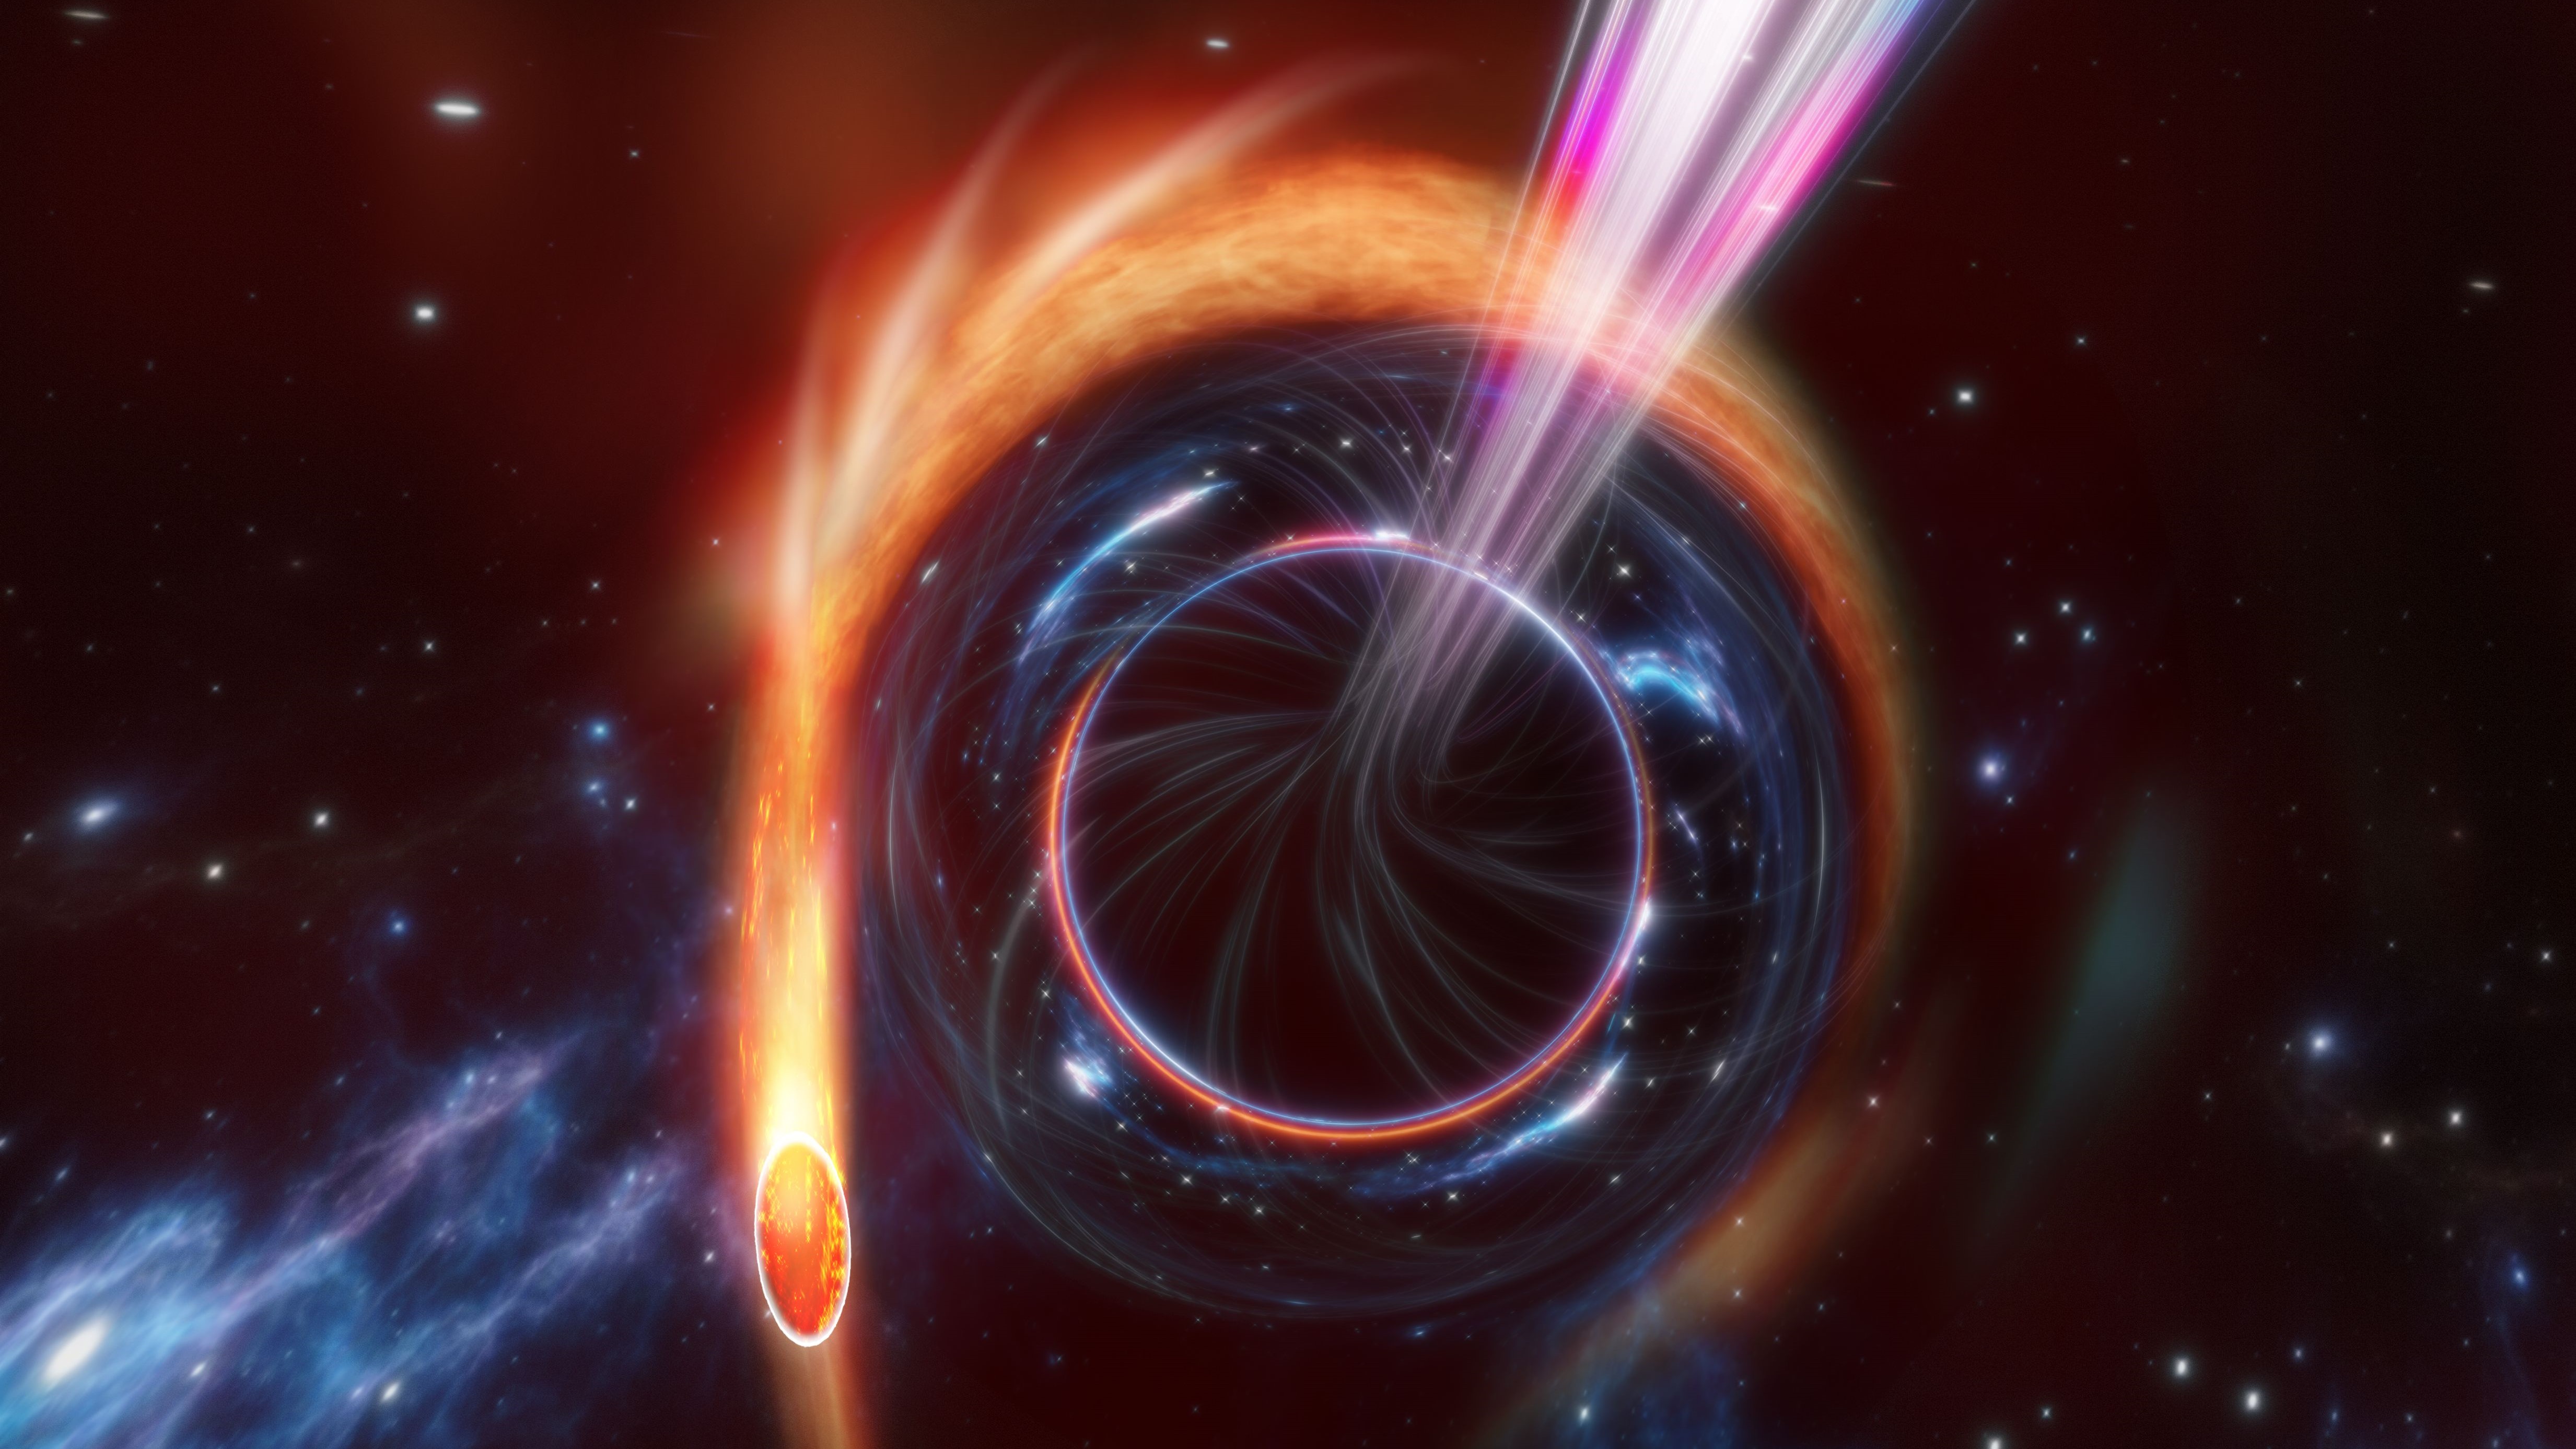 A supermassive black hole rips apart a star, causing a bright optical flare to shoot out